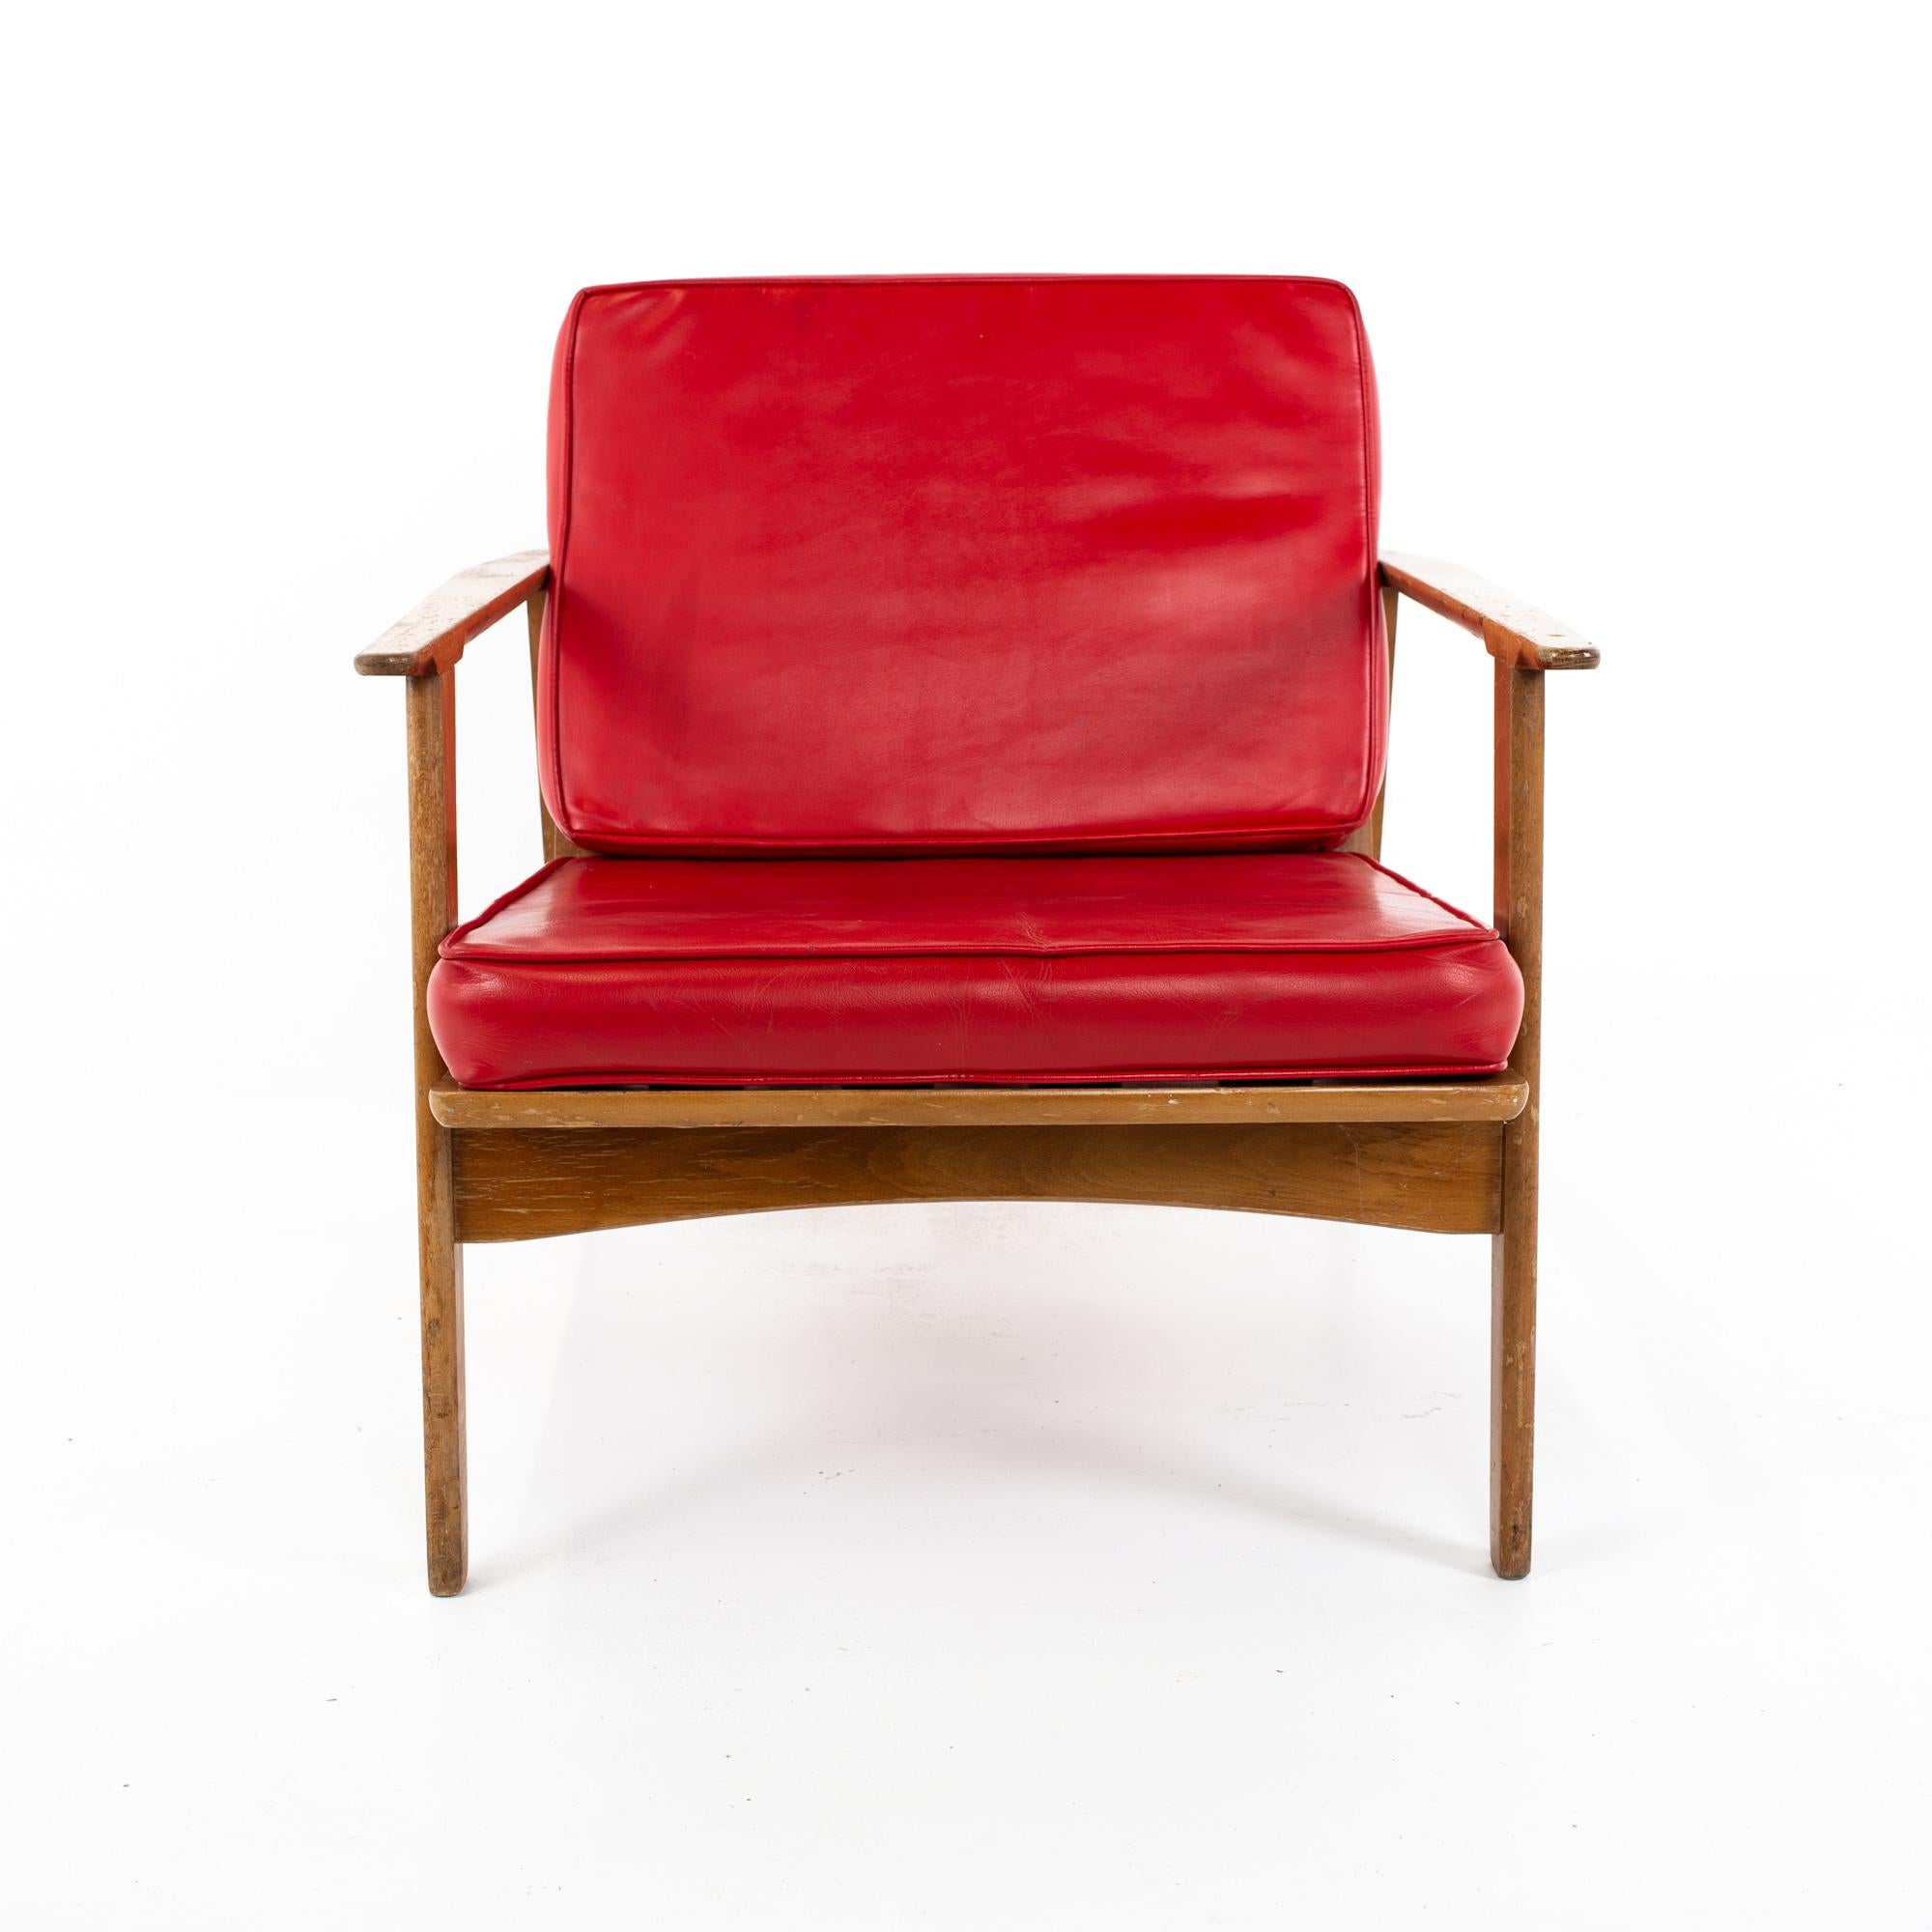 Mid Century Danish style walnut lounge chair 
Chair measures: 25 wide x 32 deep x 27 high, with a seat height of 16 inches

This piece is available in what we call restored vintage condition. Upon purchase it is thoroughly cleaned and minor repairs